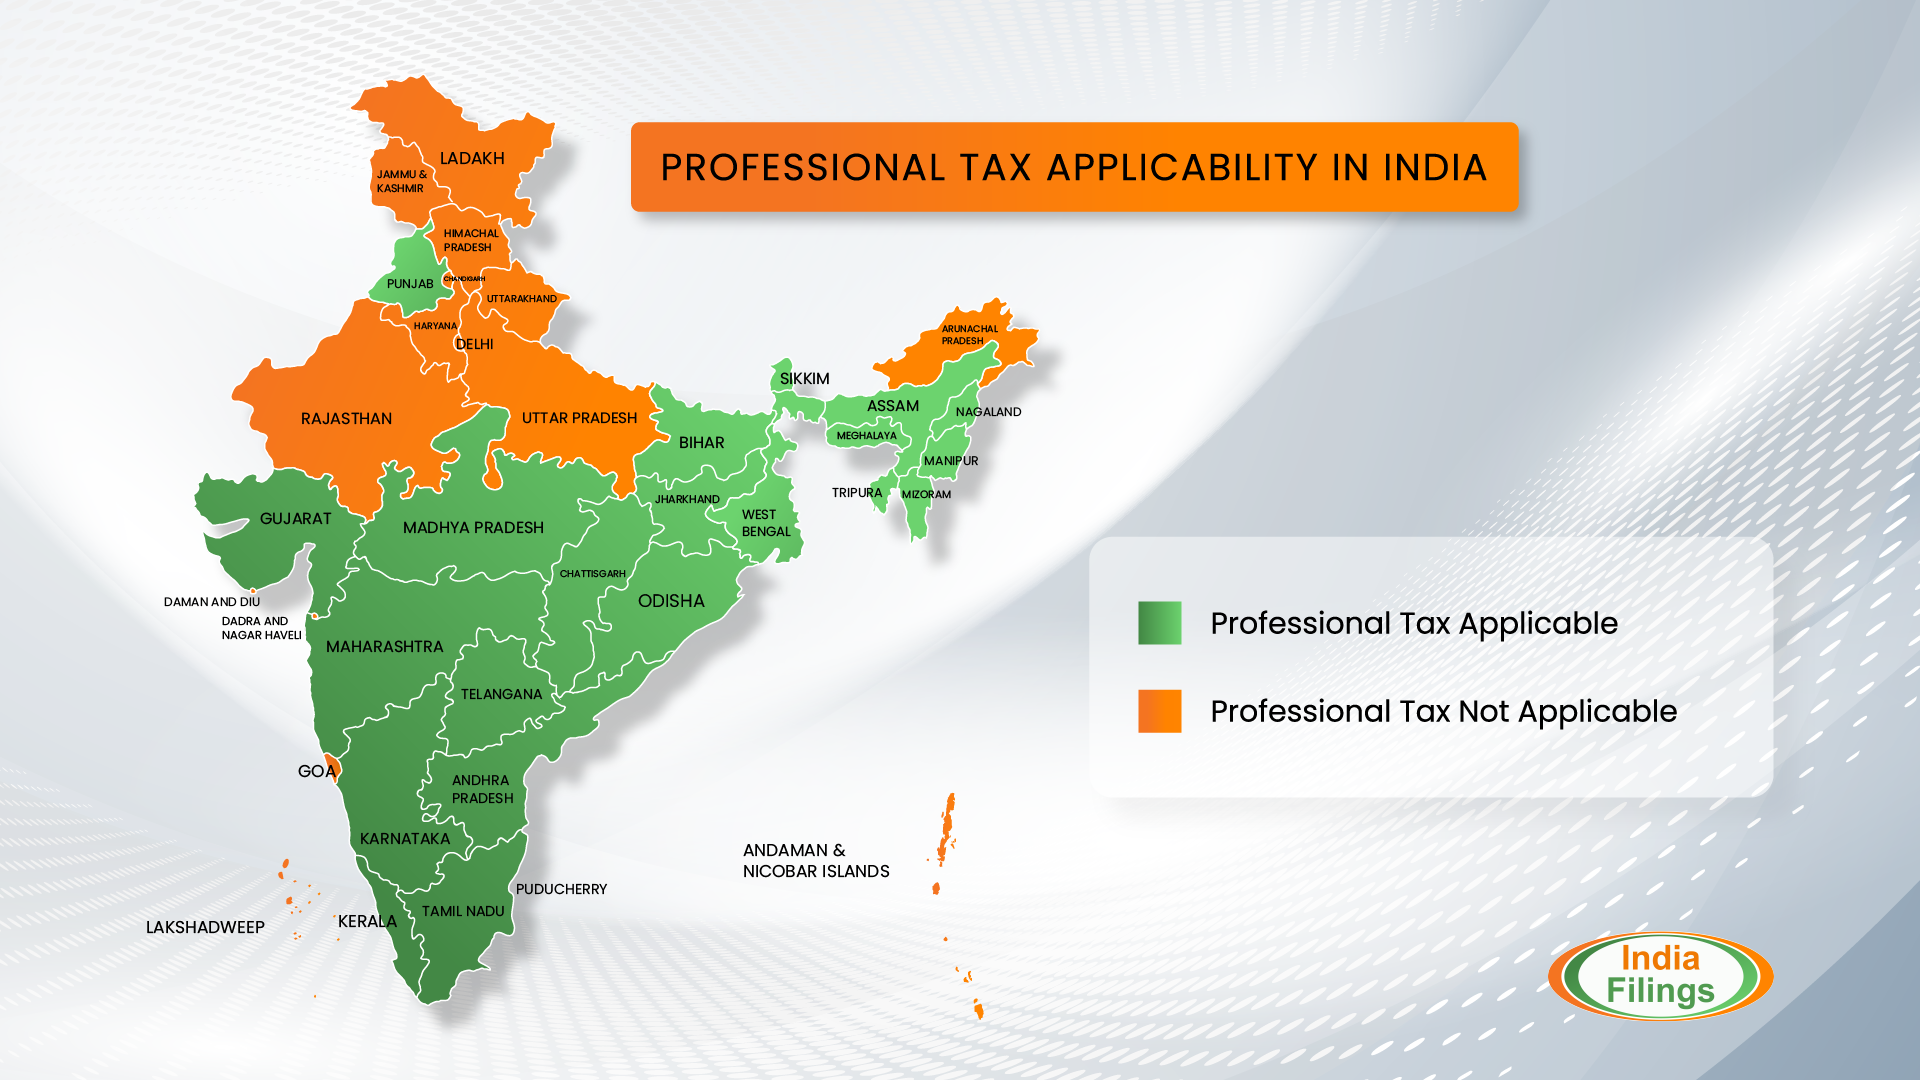 Professional Tax Applicable States across India